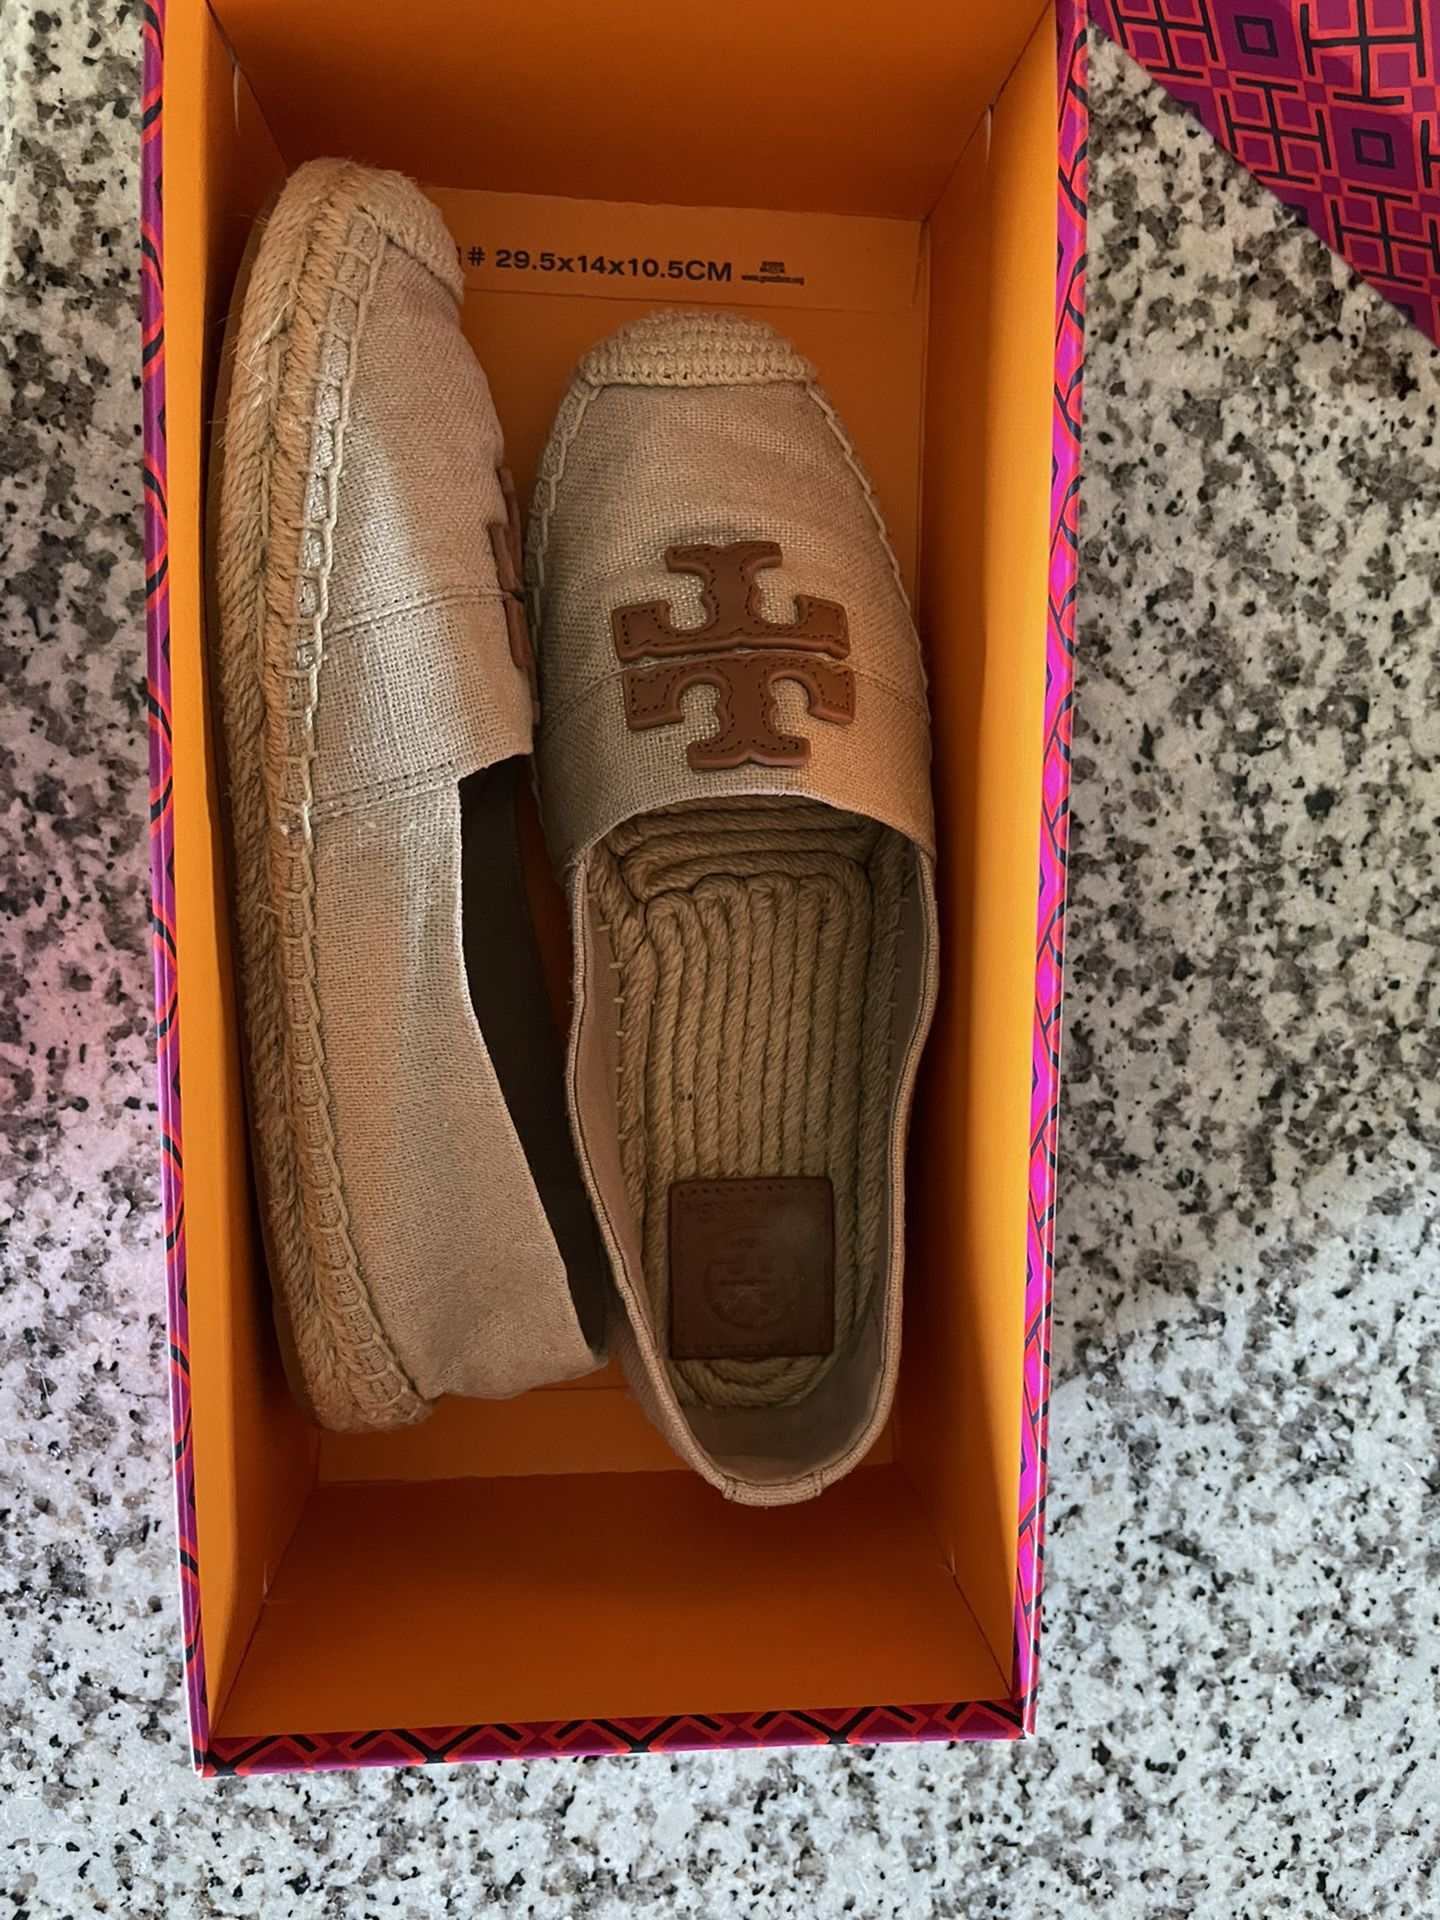 Tory Burch Shoes Size 7 for Sale in Mesquite, TX - OfferUp